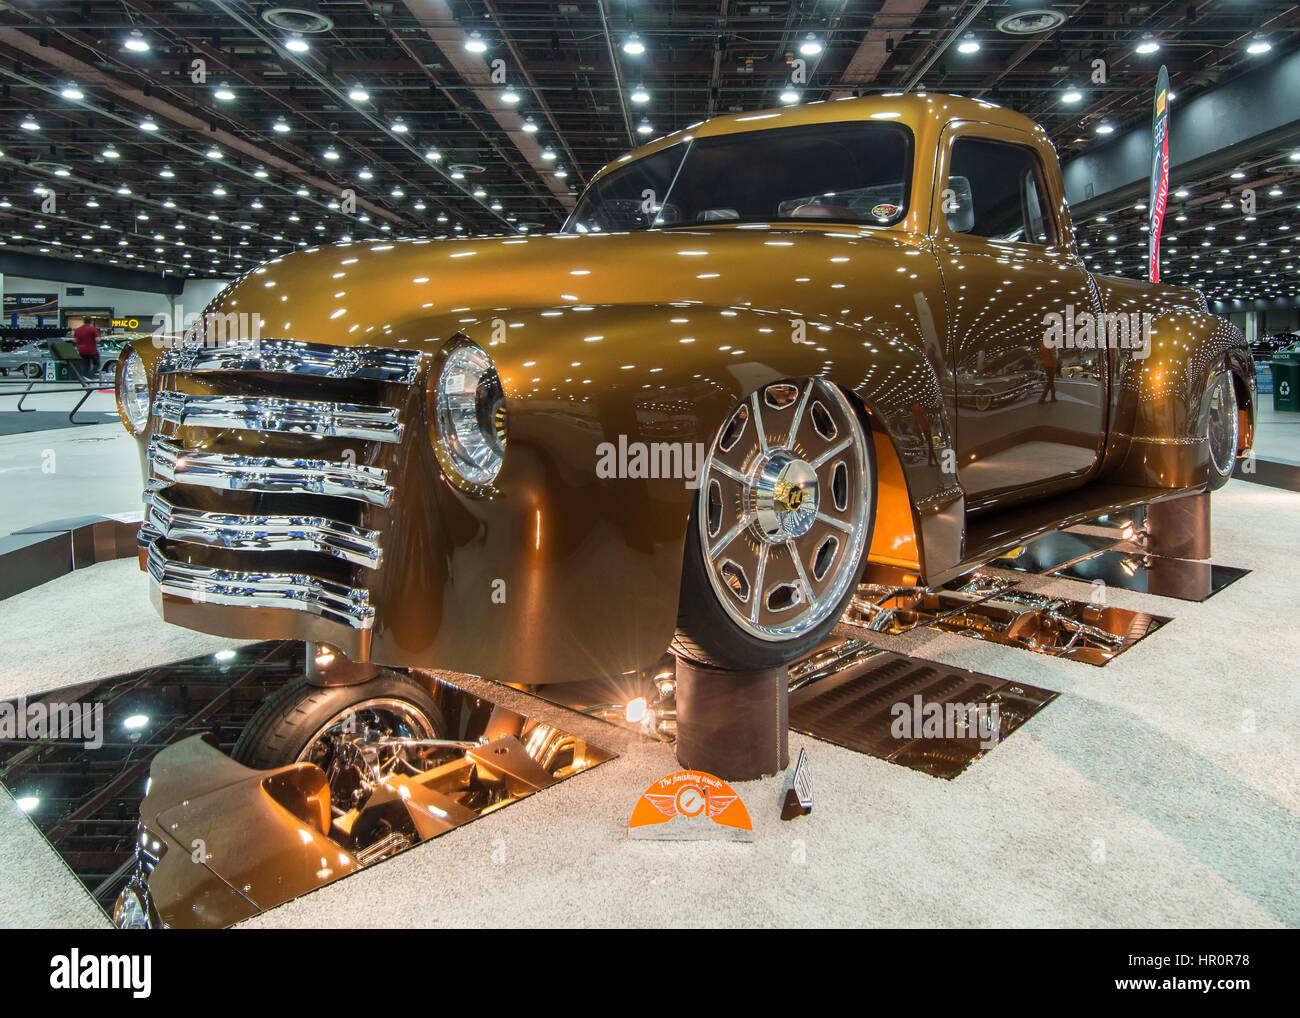 Detroit, USA. 25th Feb, 2017. A 1949 Chevrolet C10 pickup truck interpretation, 'Great 8' finalist and contender for the Ridler trophy, on display at the Detroit Autorama, a showcase of custom and restored cars. Credit: Steve Lagreca/Alamy Live News Stock Photo